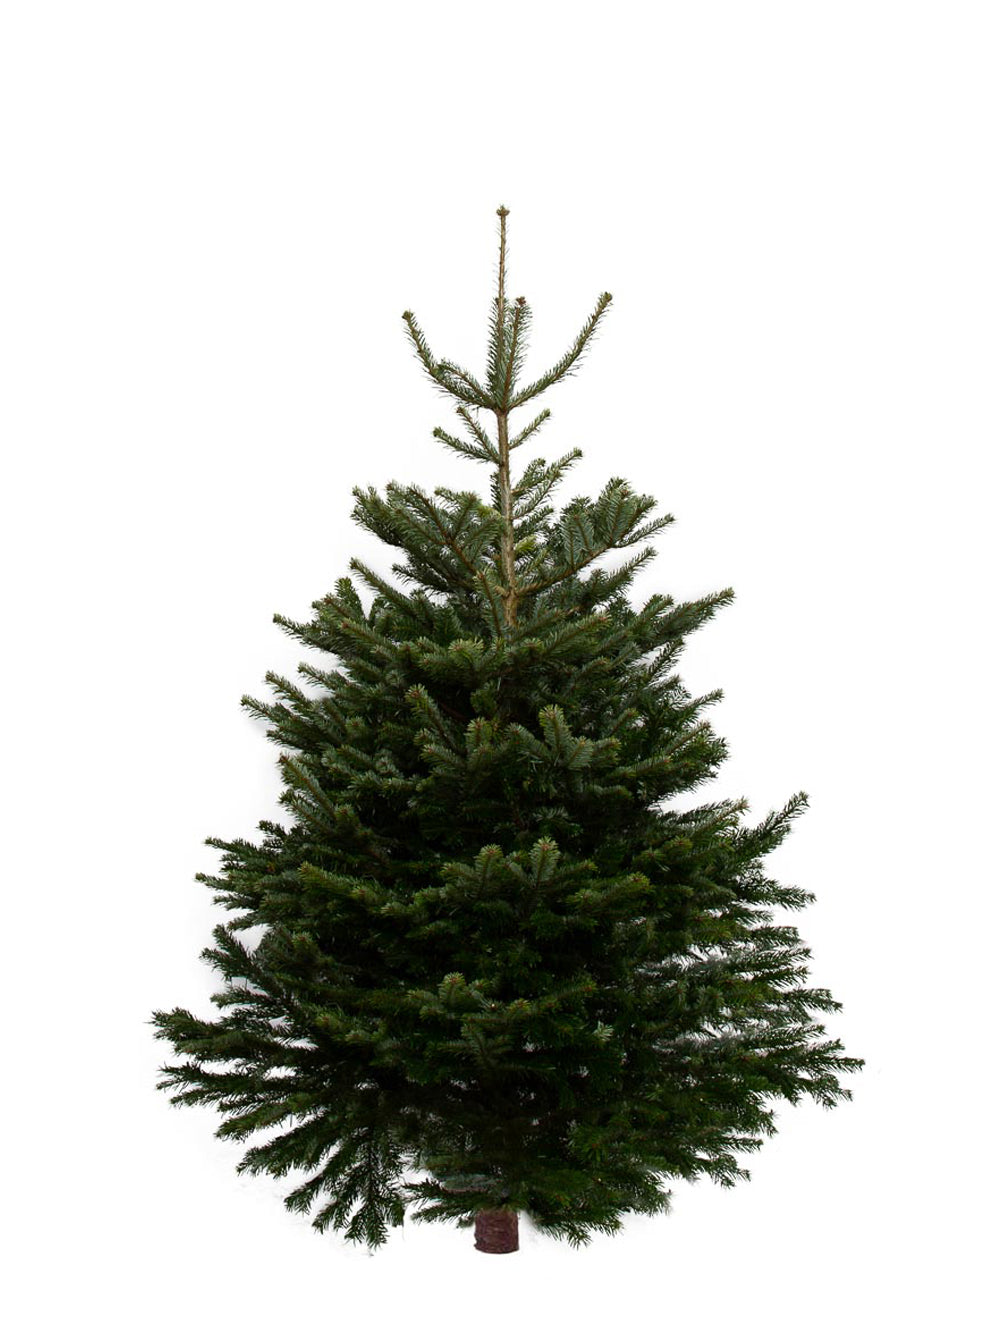 8ft Nordmann Fir Christmas Tree from Pines and Needles